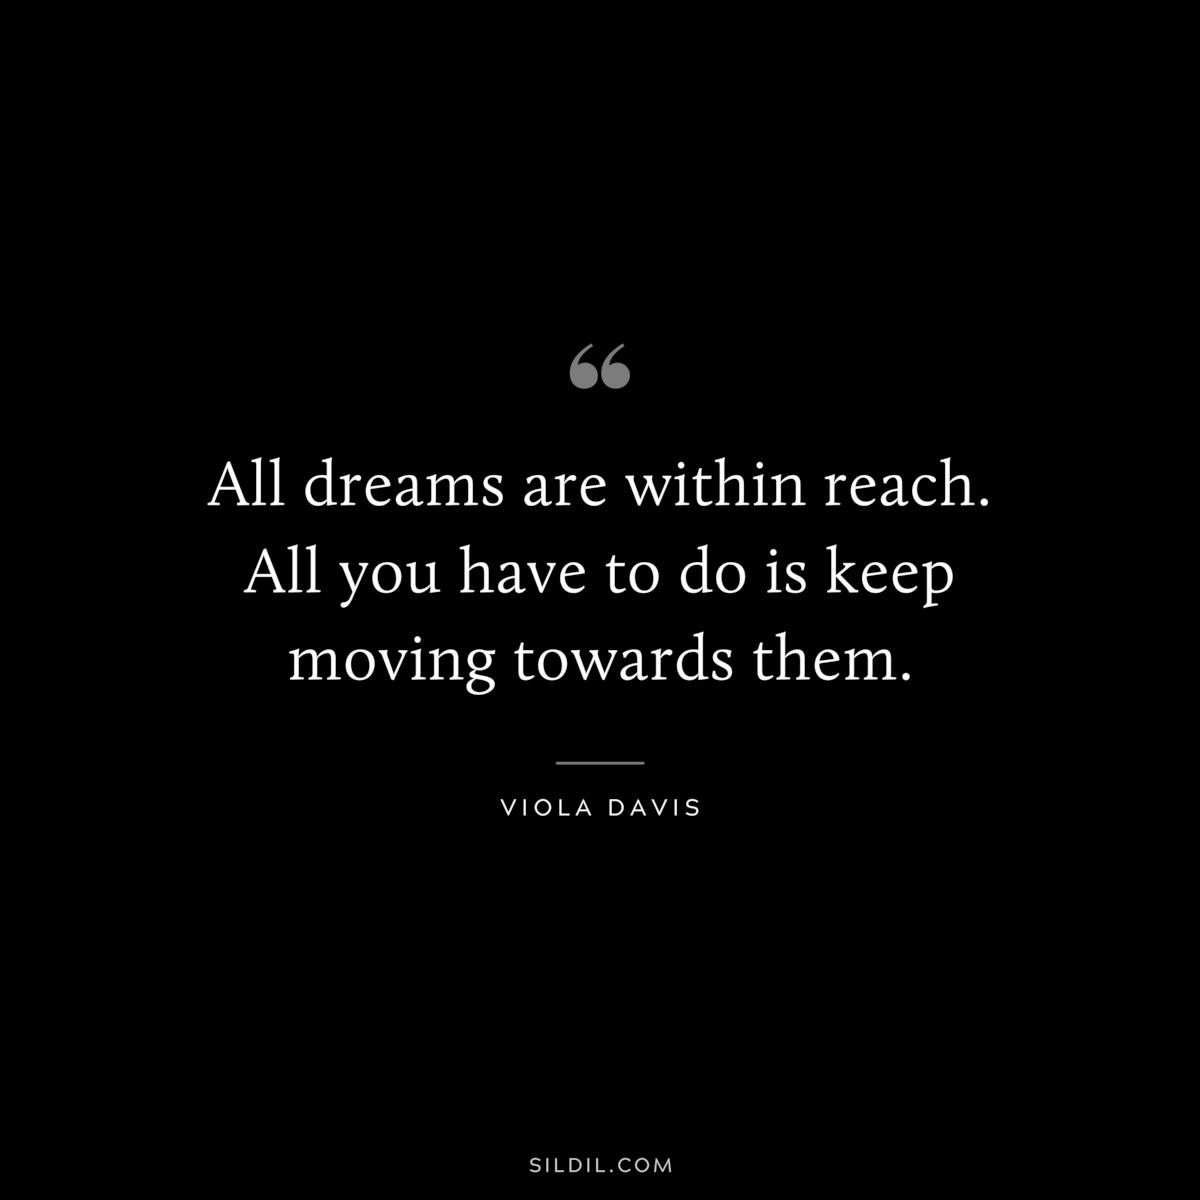 All dreams are within reach. All you have to do is keep moving towards them. ― Viola Davis